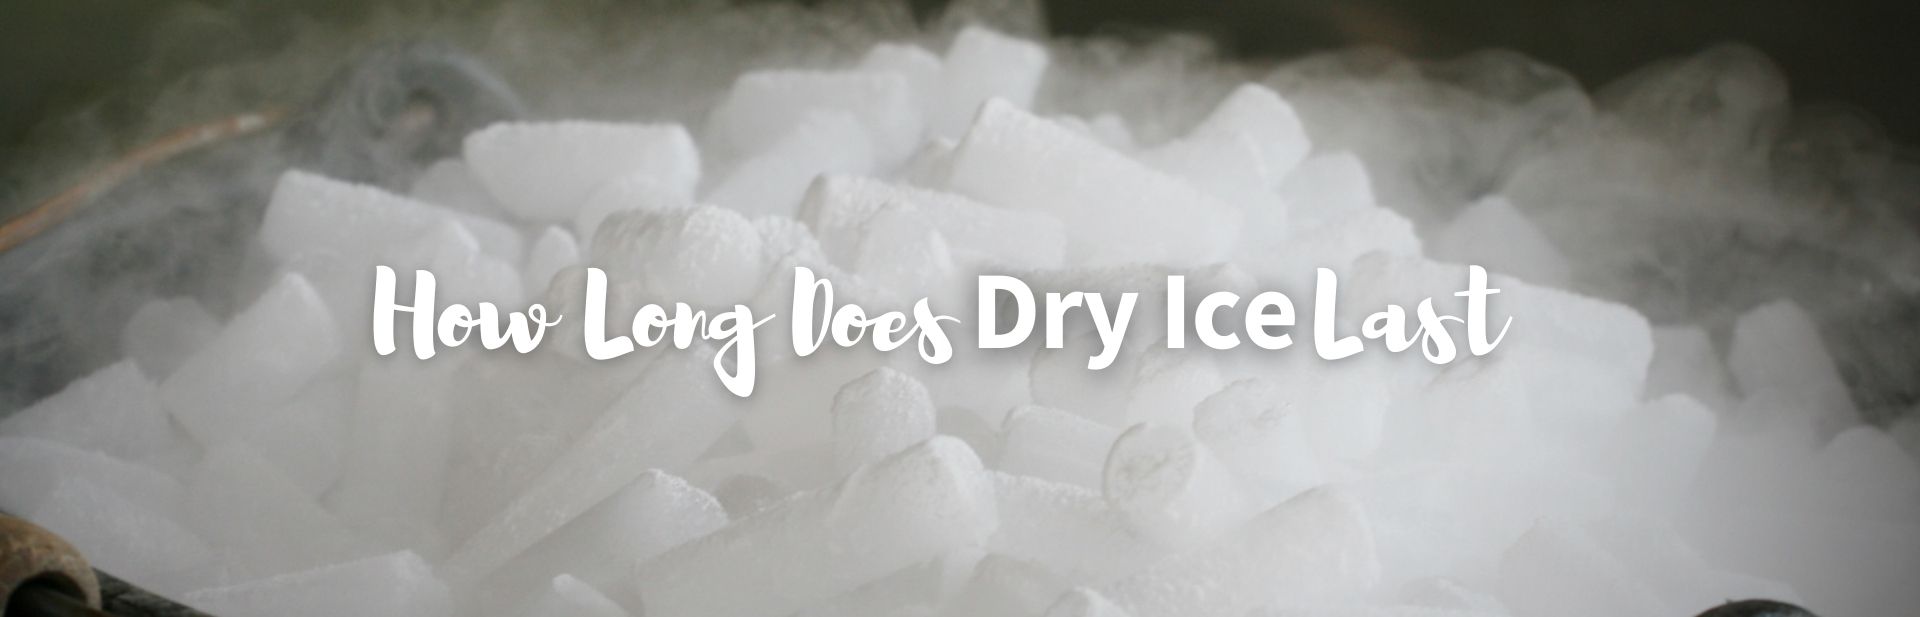 How Long Does Dry Ice Last? Handling & Storage Tips